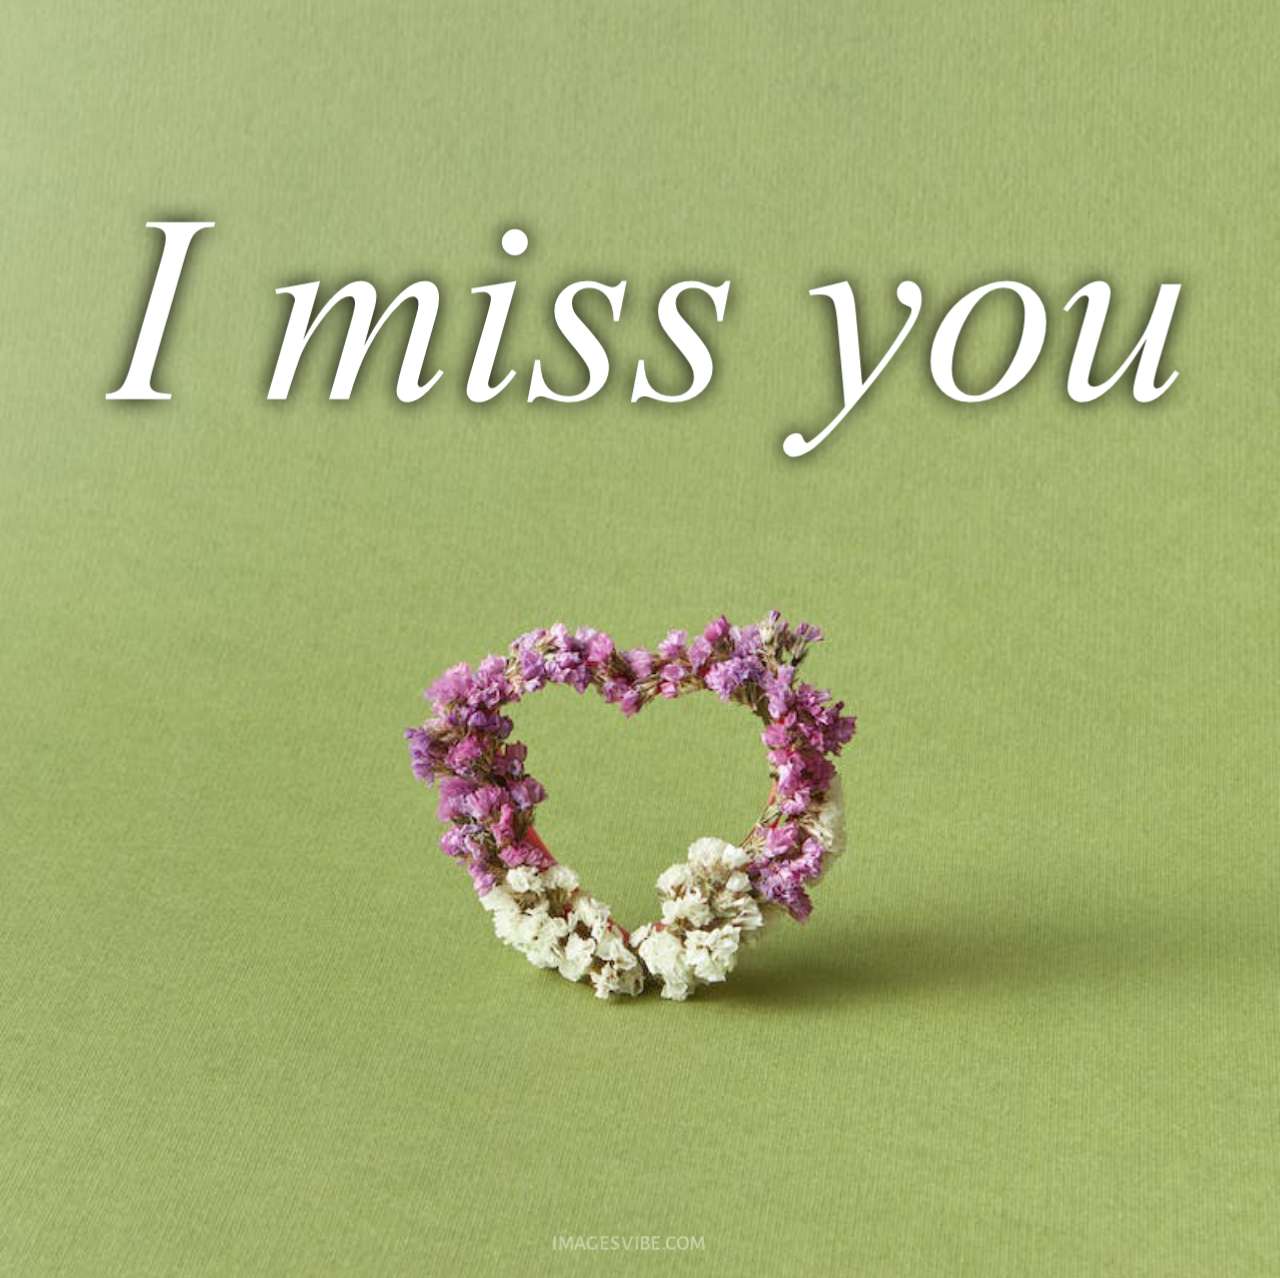 I Miss You Images12 